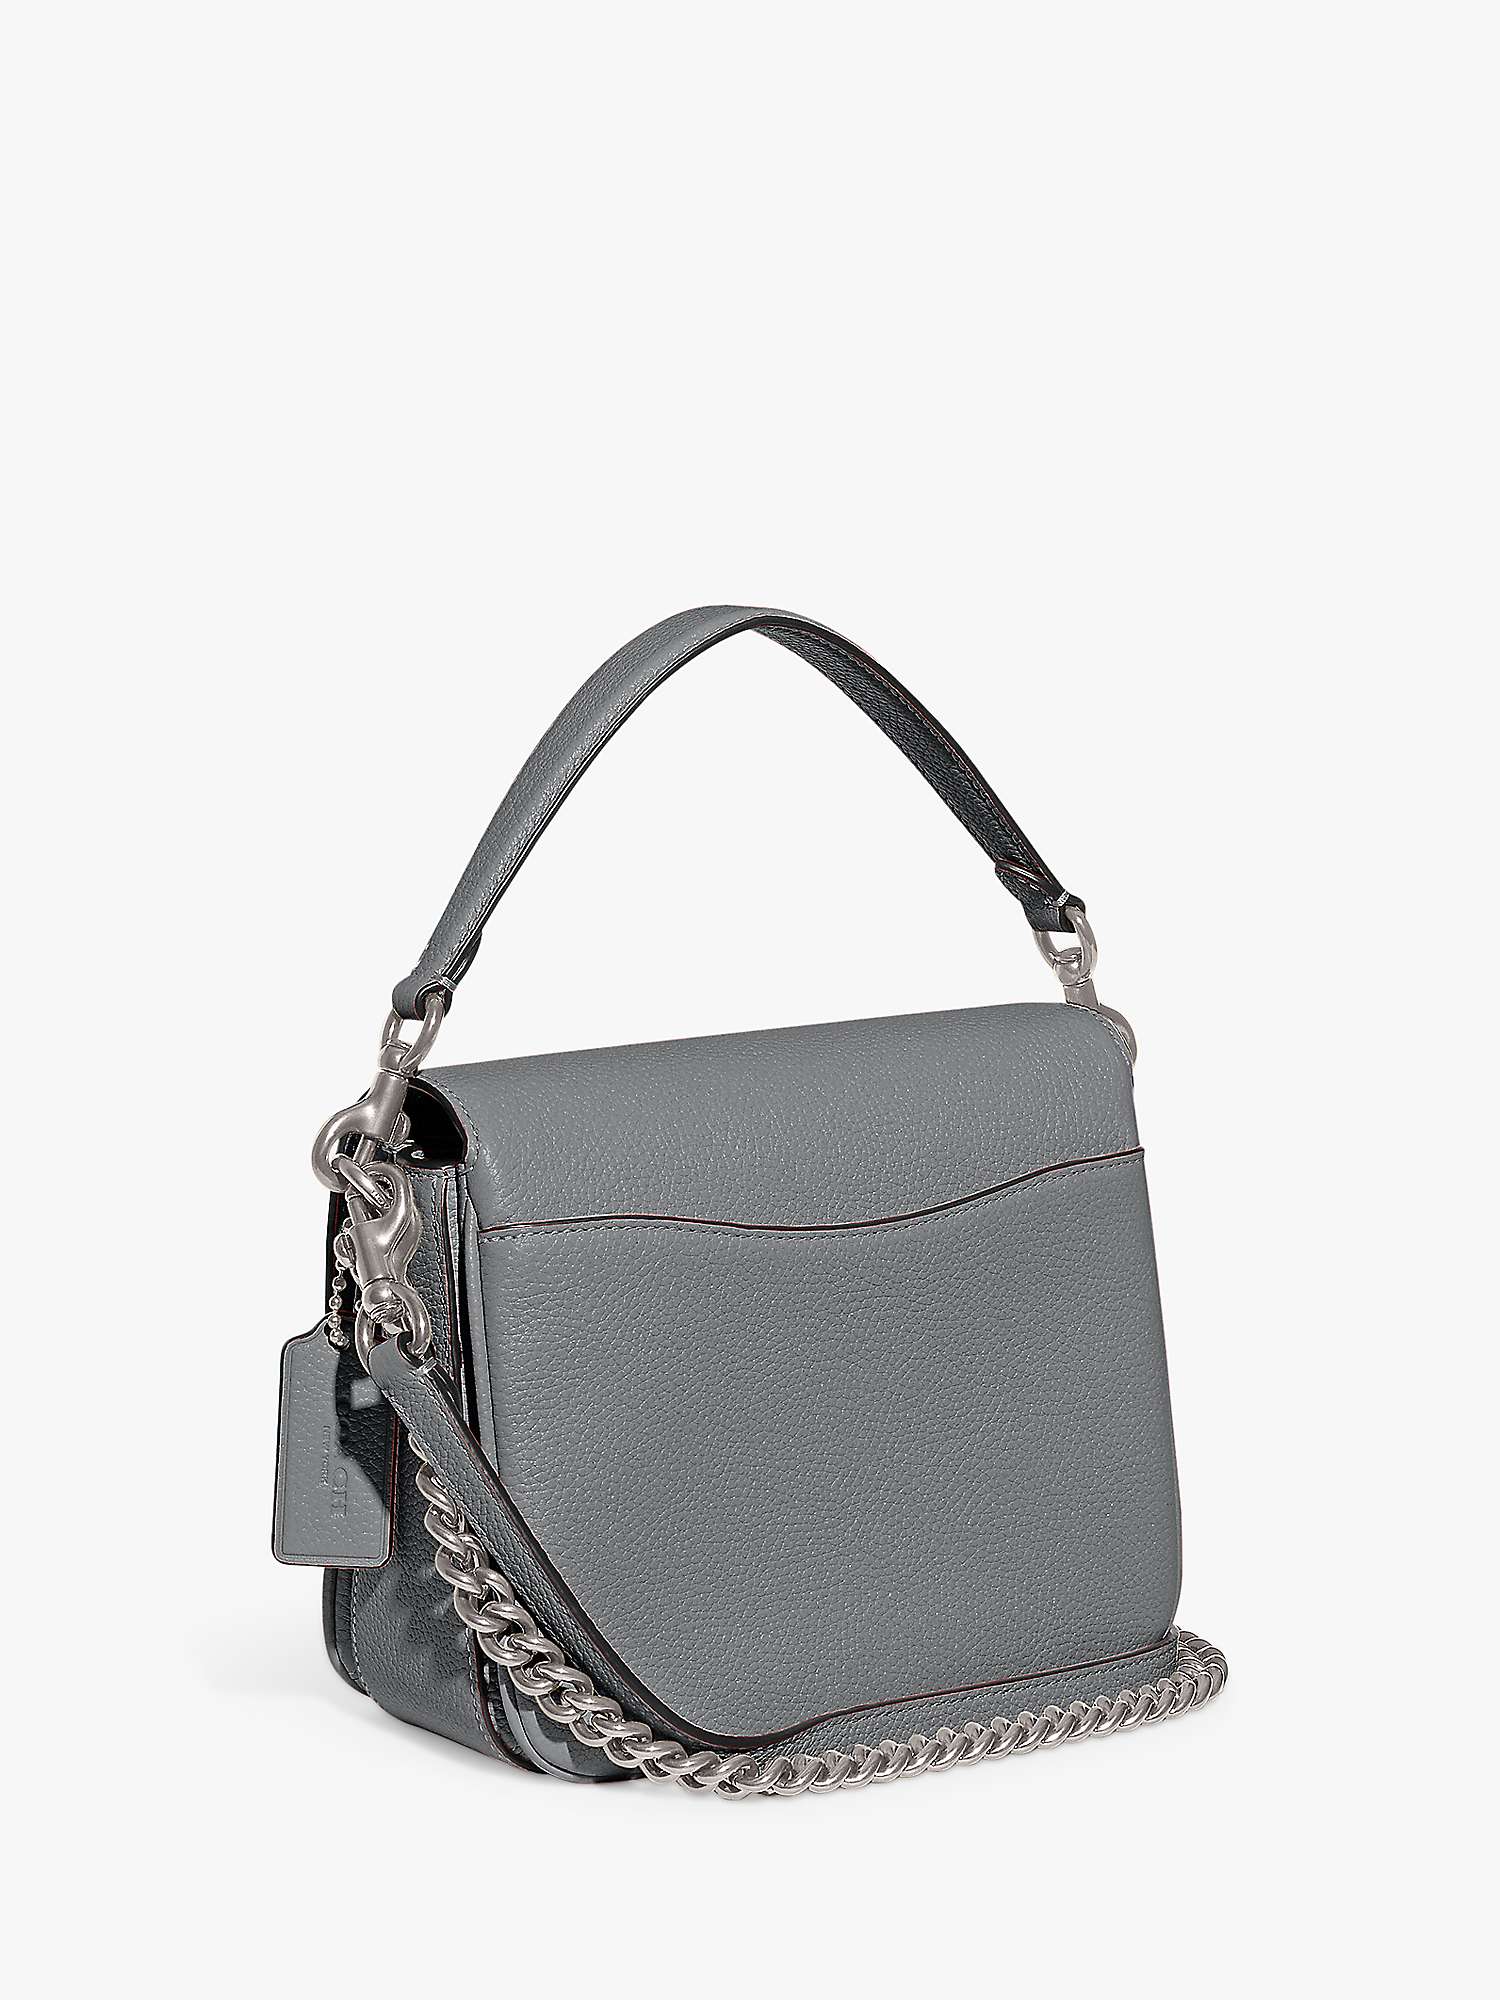 Coach Cassie 19 Leather Cross Body Bag, Grey Blue at John Lewis & Partners